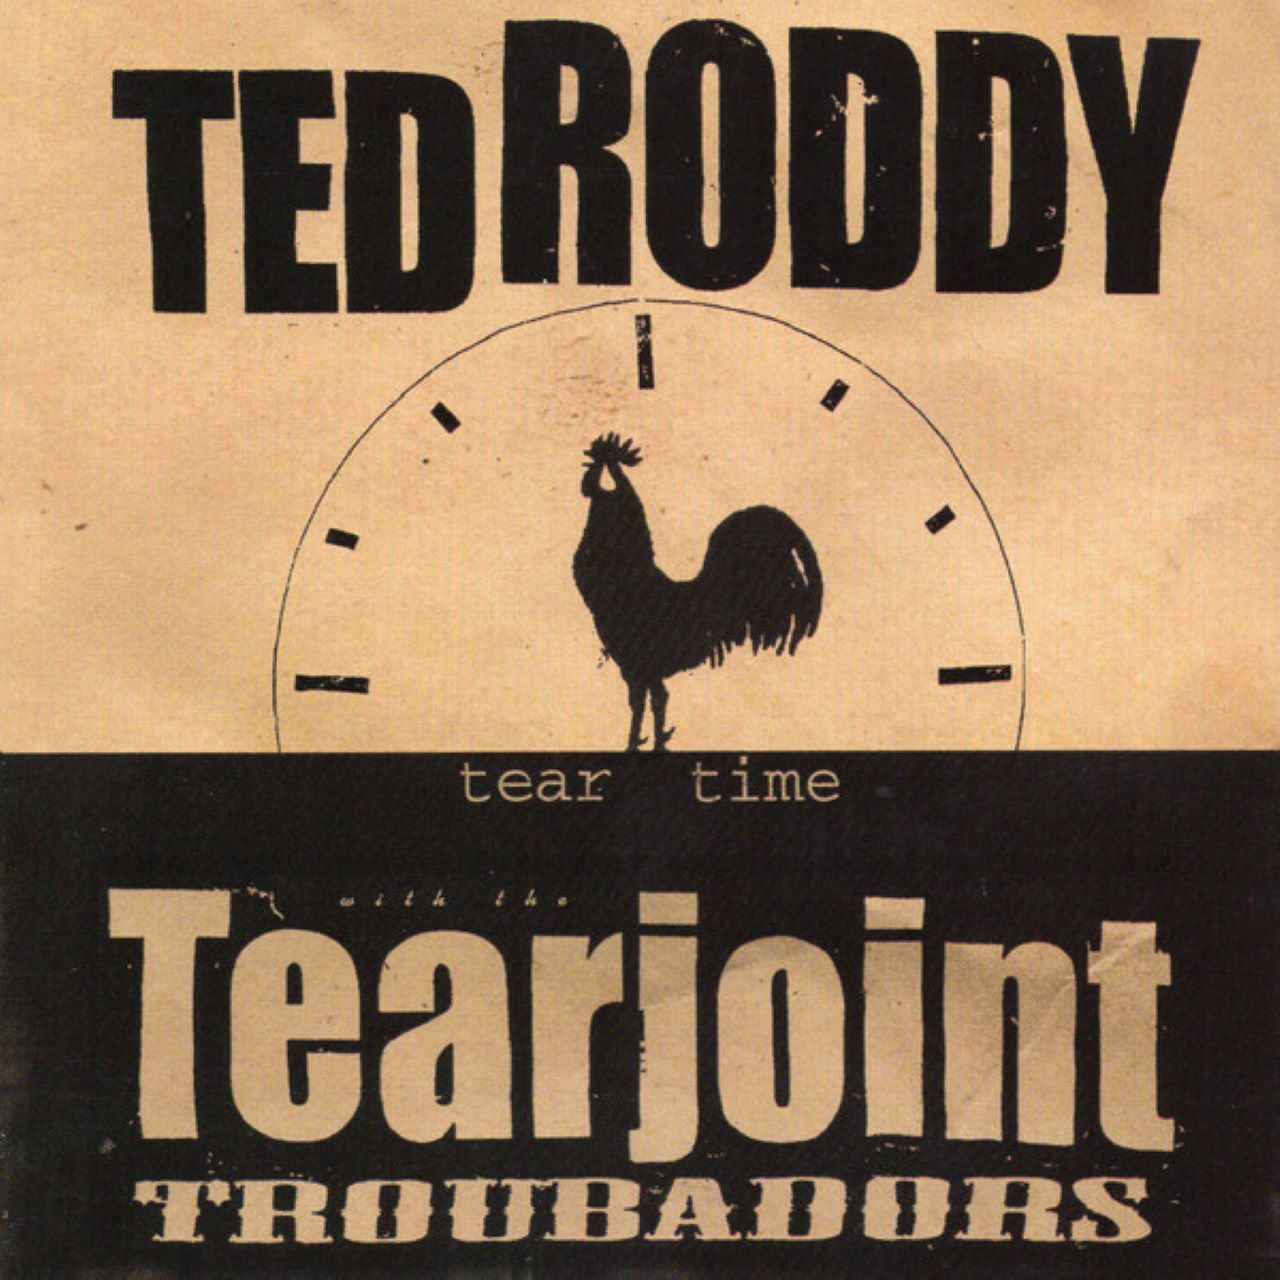 Ted Roddy - Tear Time cover album